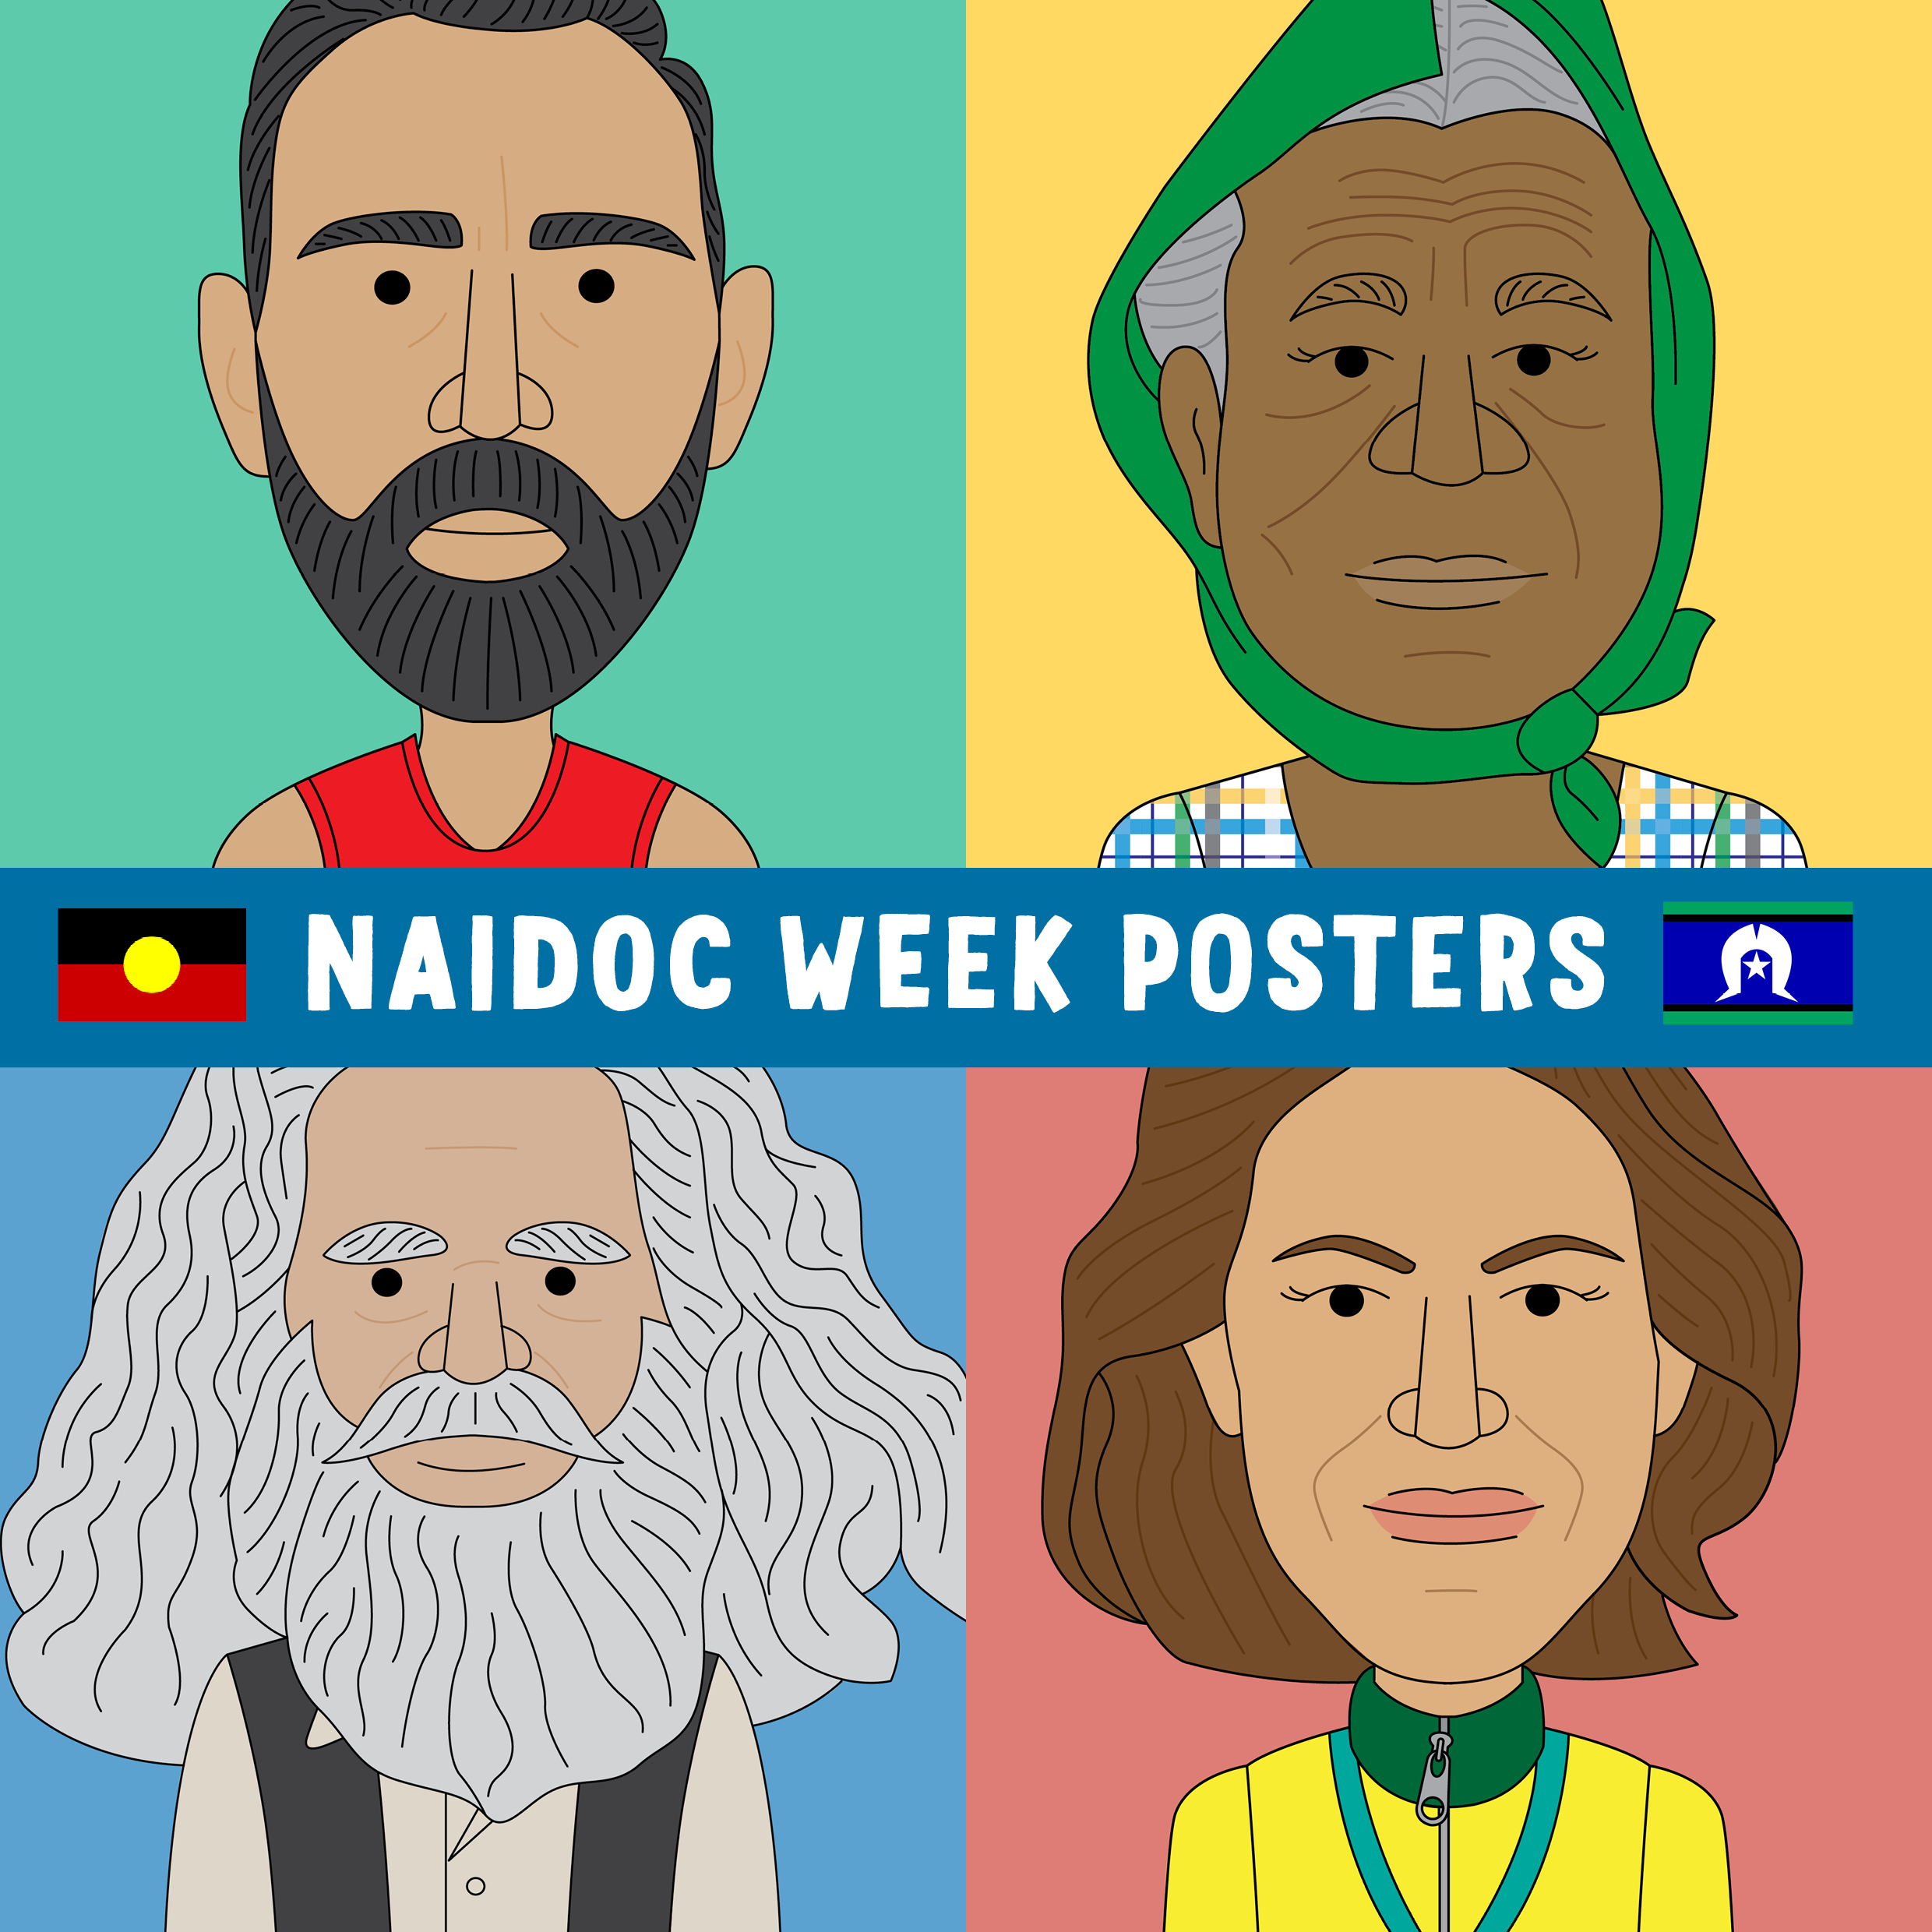 NAIDOC Week posters of famous Indigenous people